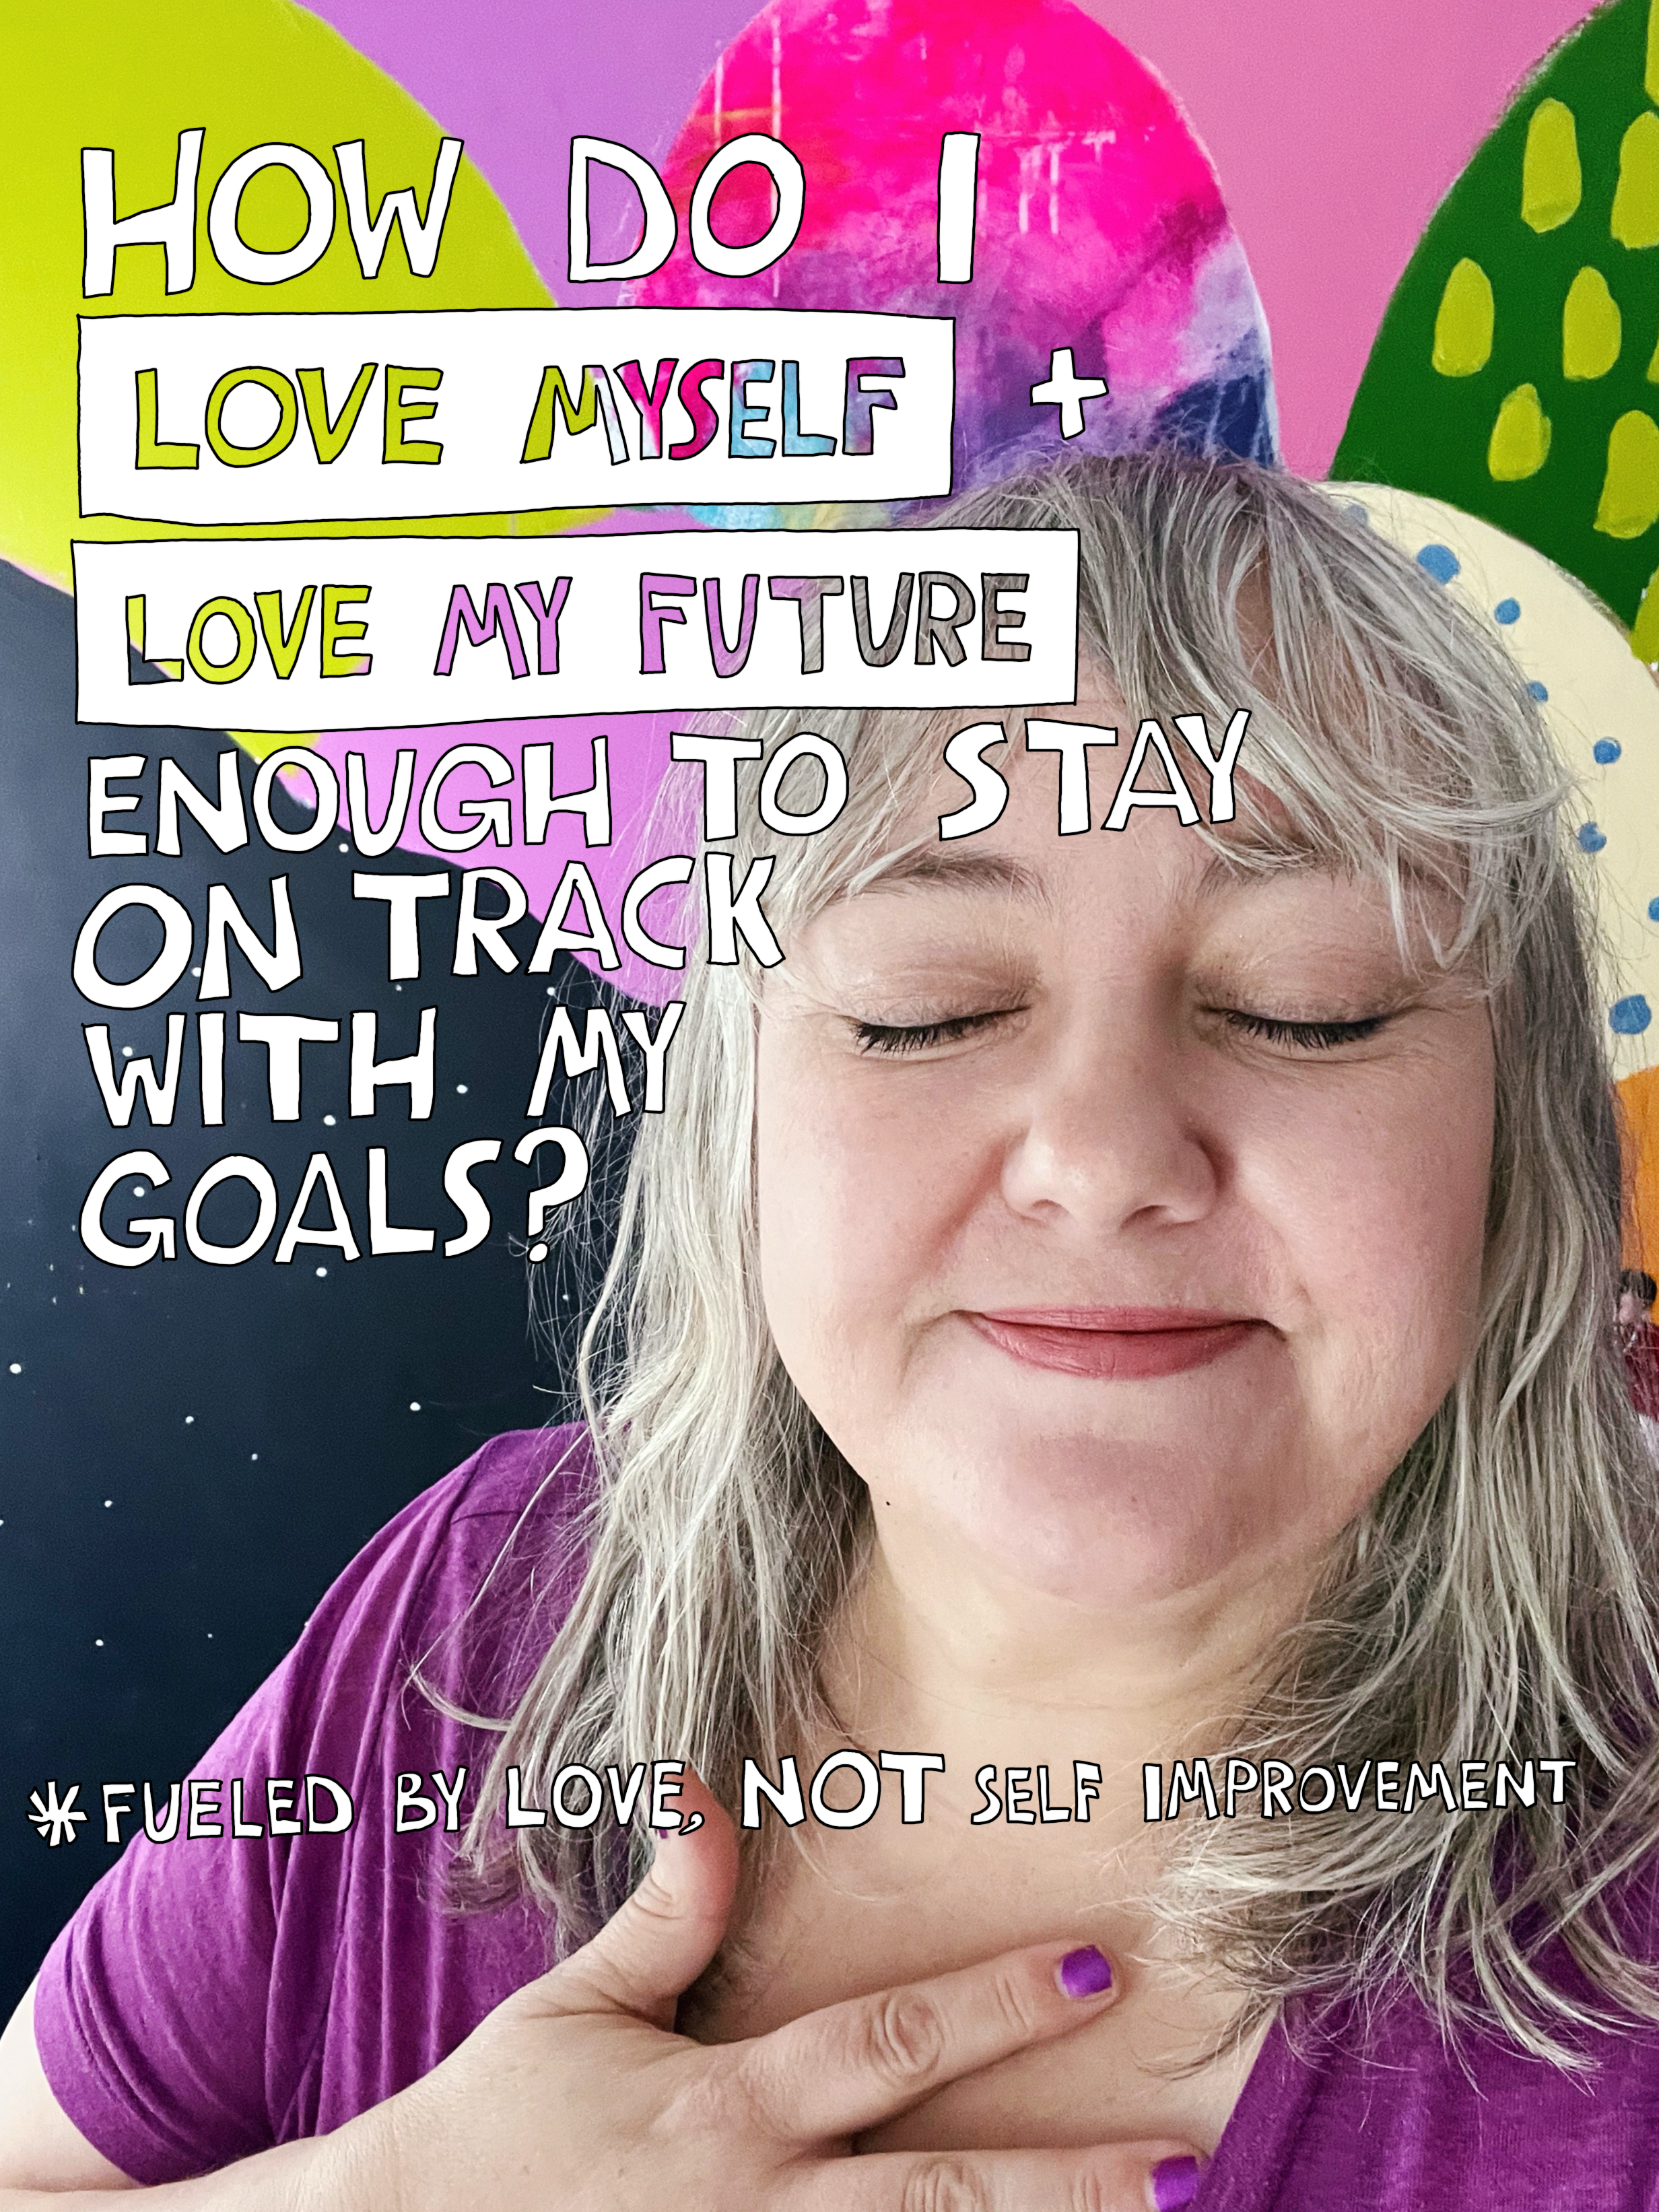 How do I love myself and love my future enough to stay on track with my goals?